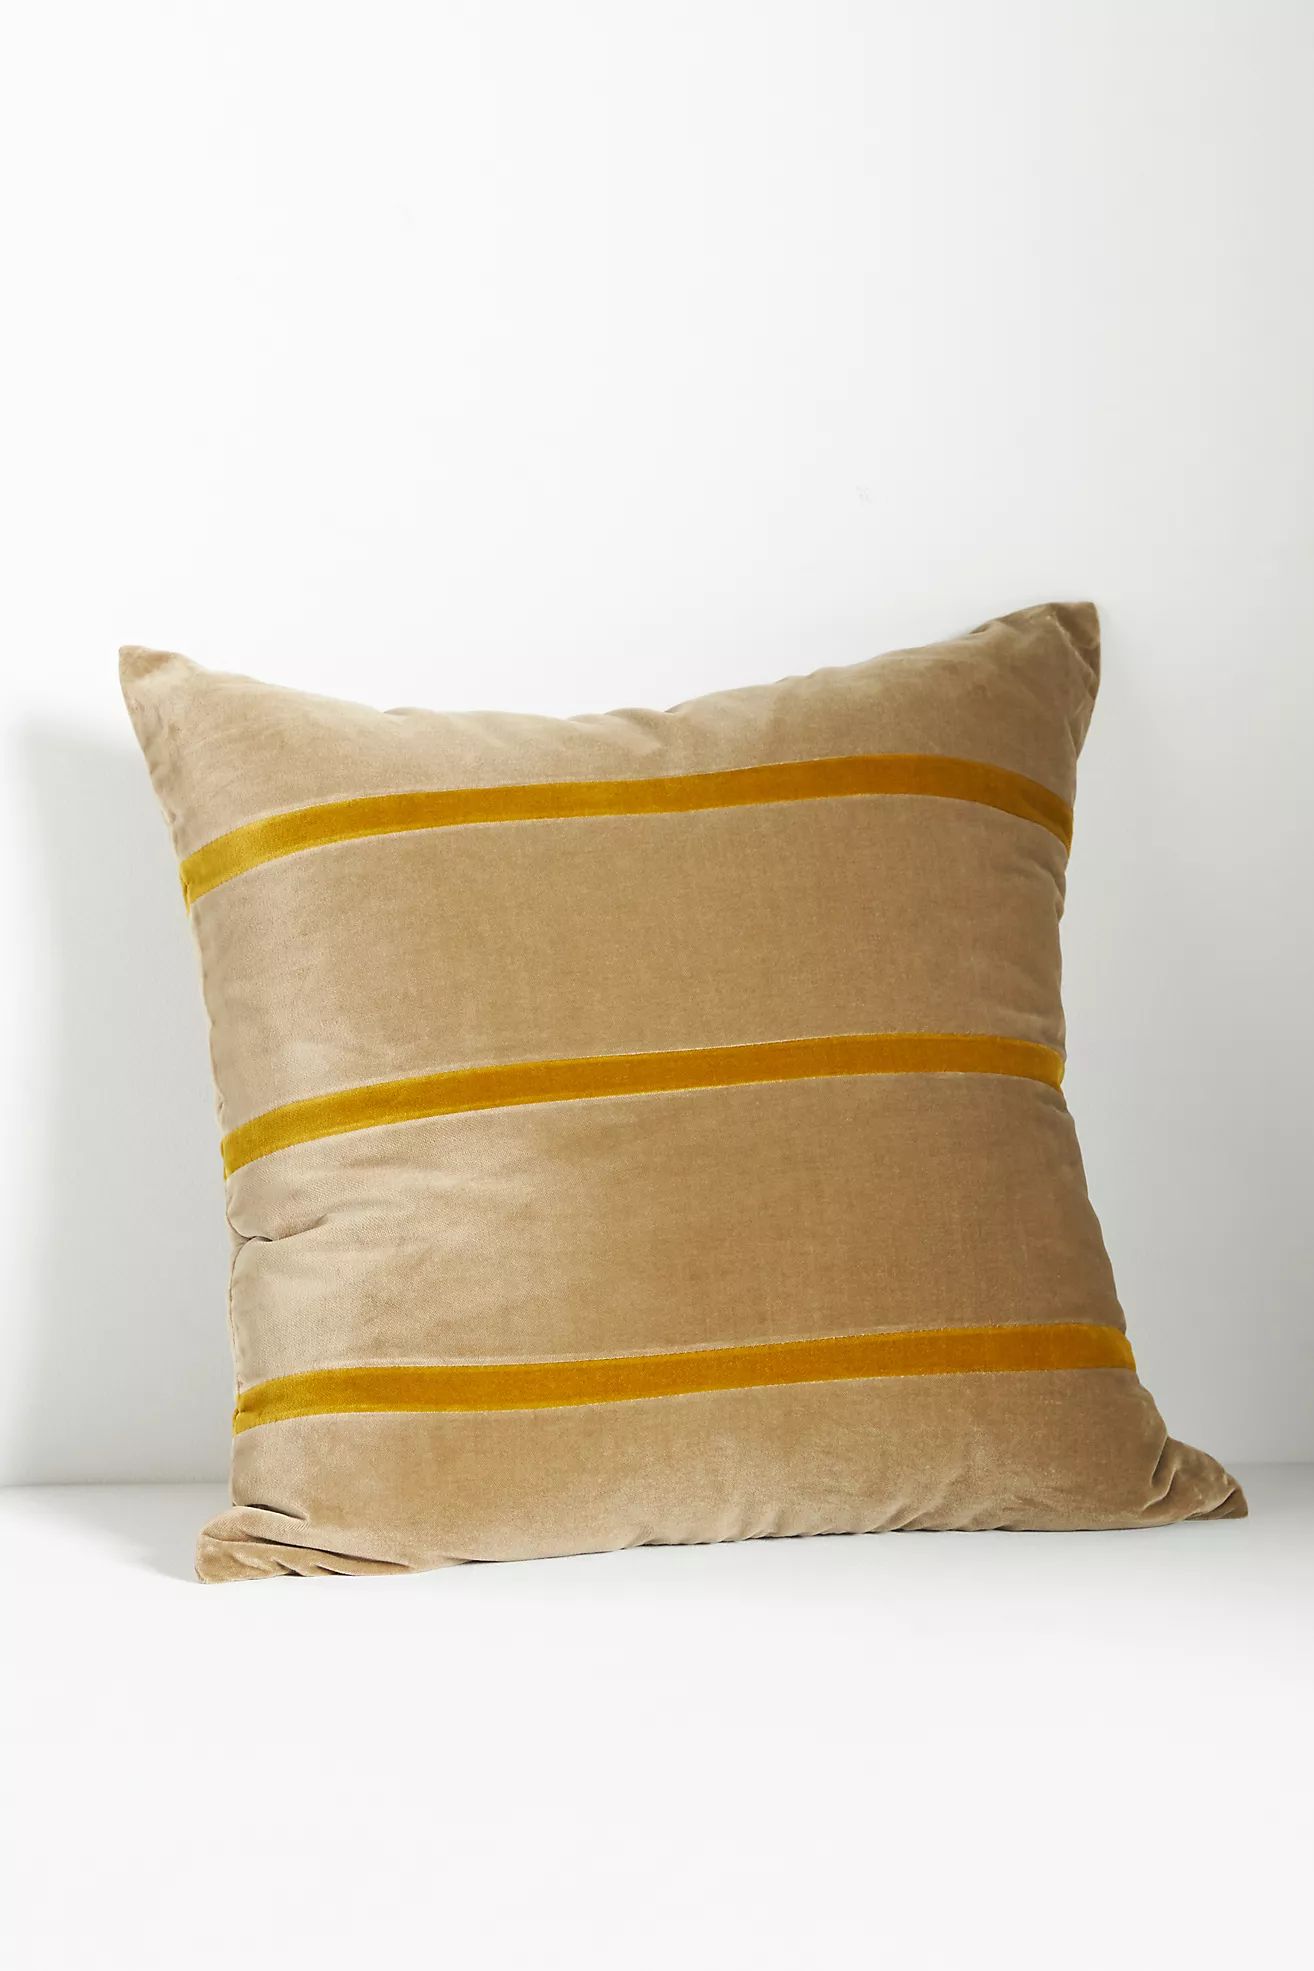 Christina Lundsteen Gemma Pillow Cover | Anthropologie (US)